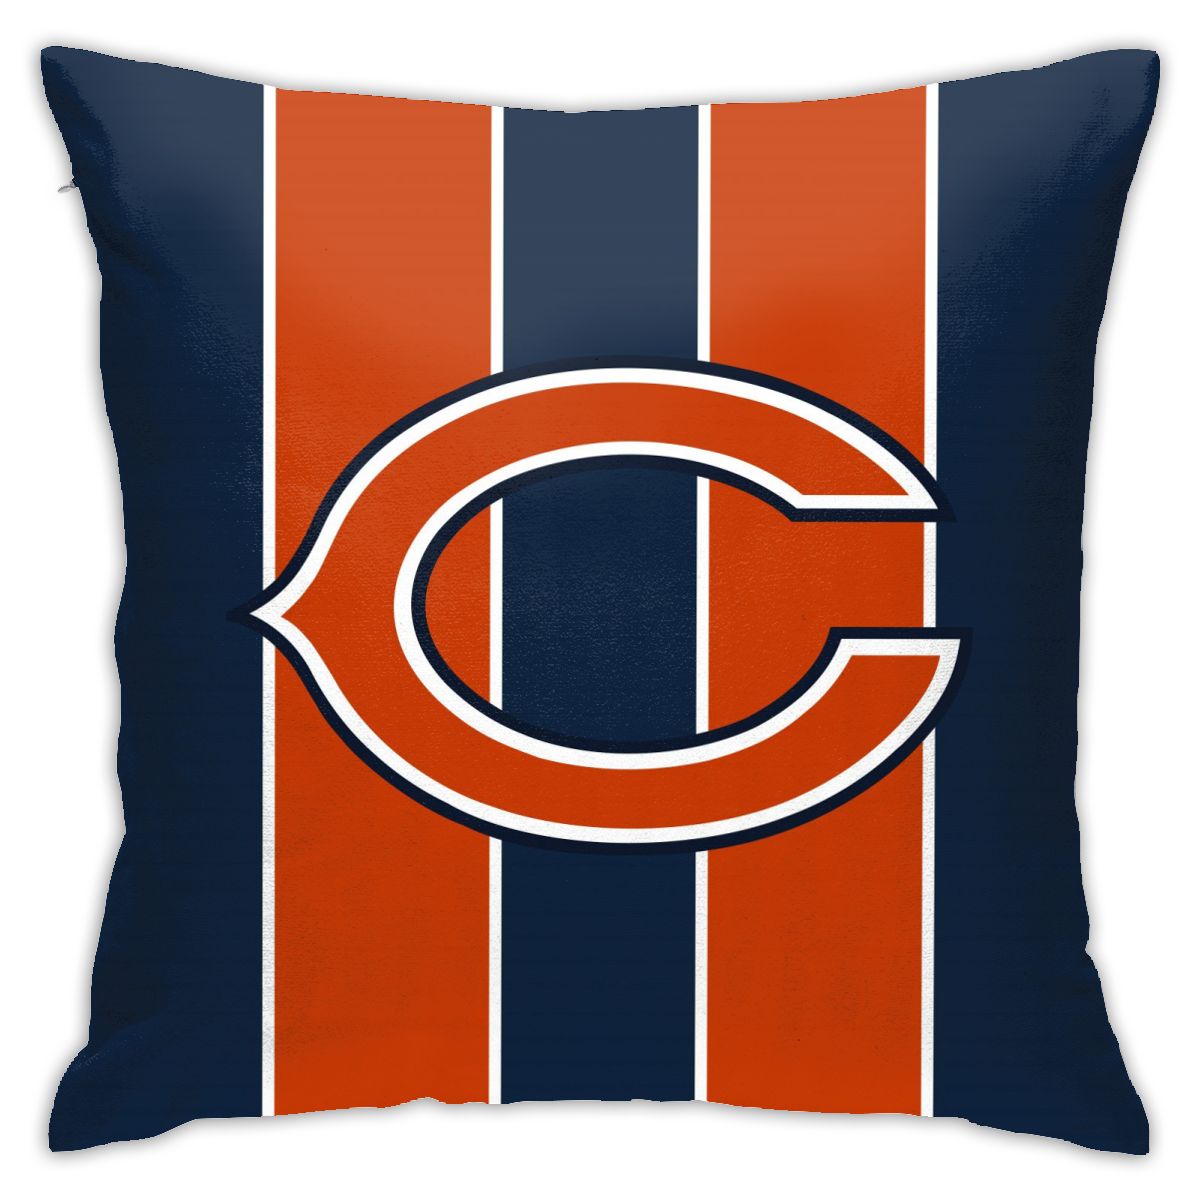 Custom Decorative Pillow 18inch*18inch 01- Navy Pillowcase Personalized Throw Pillow Covers